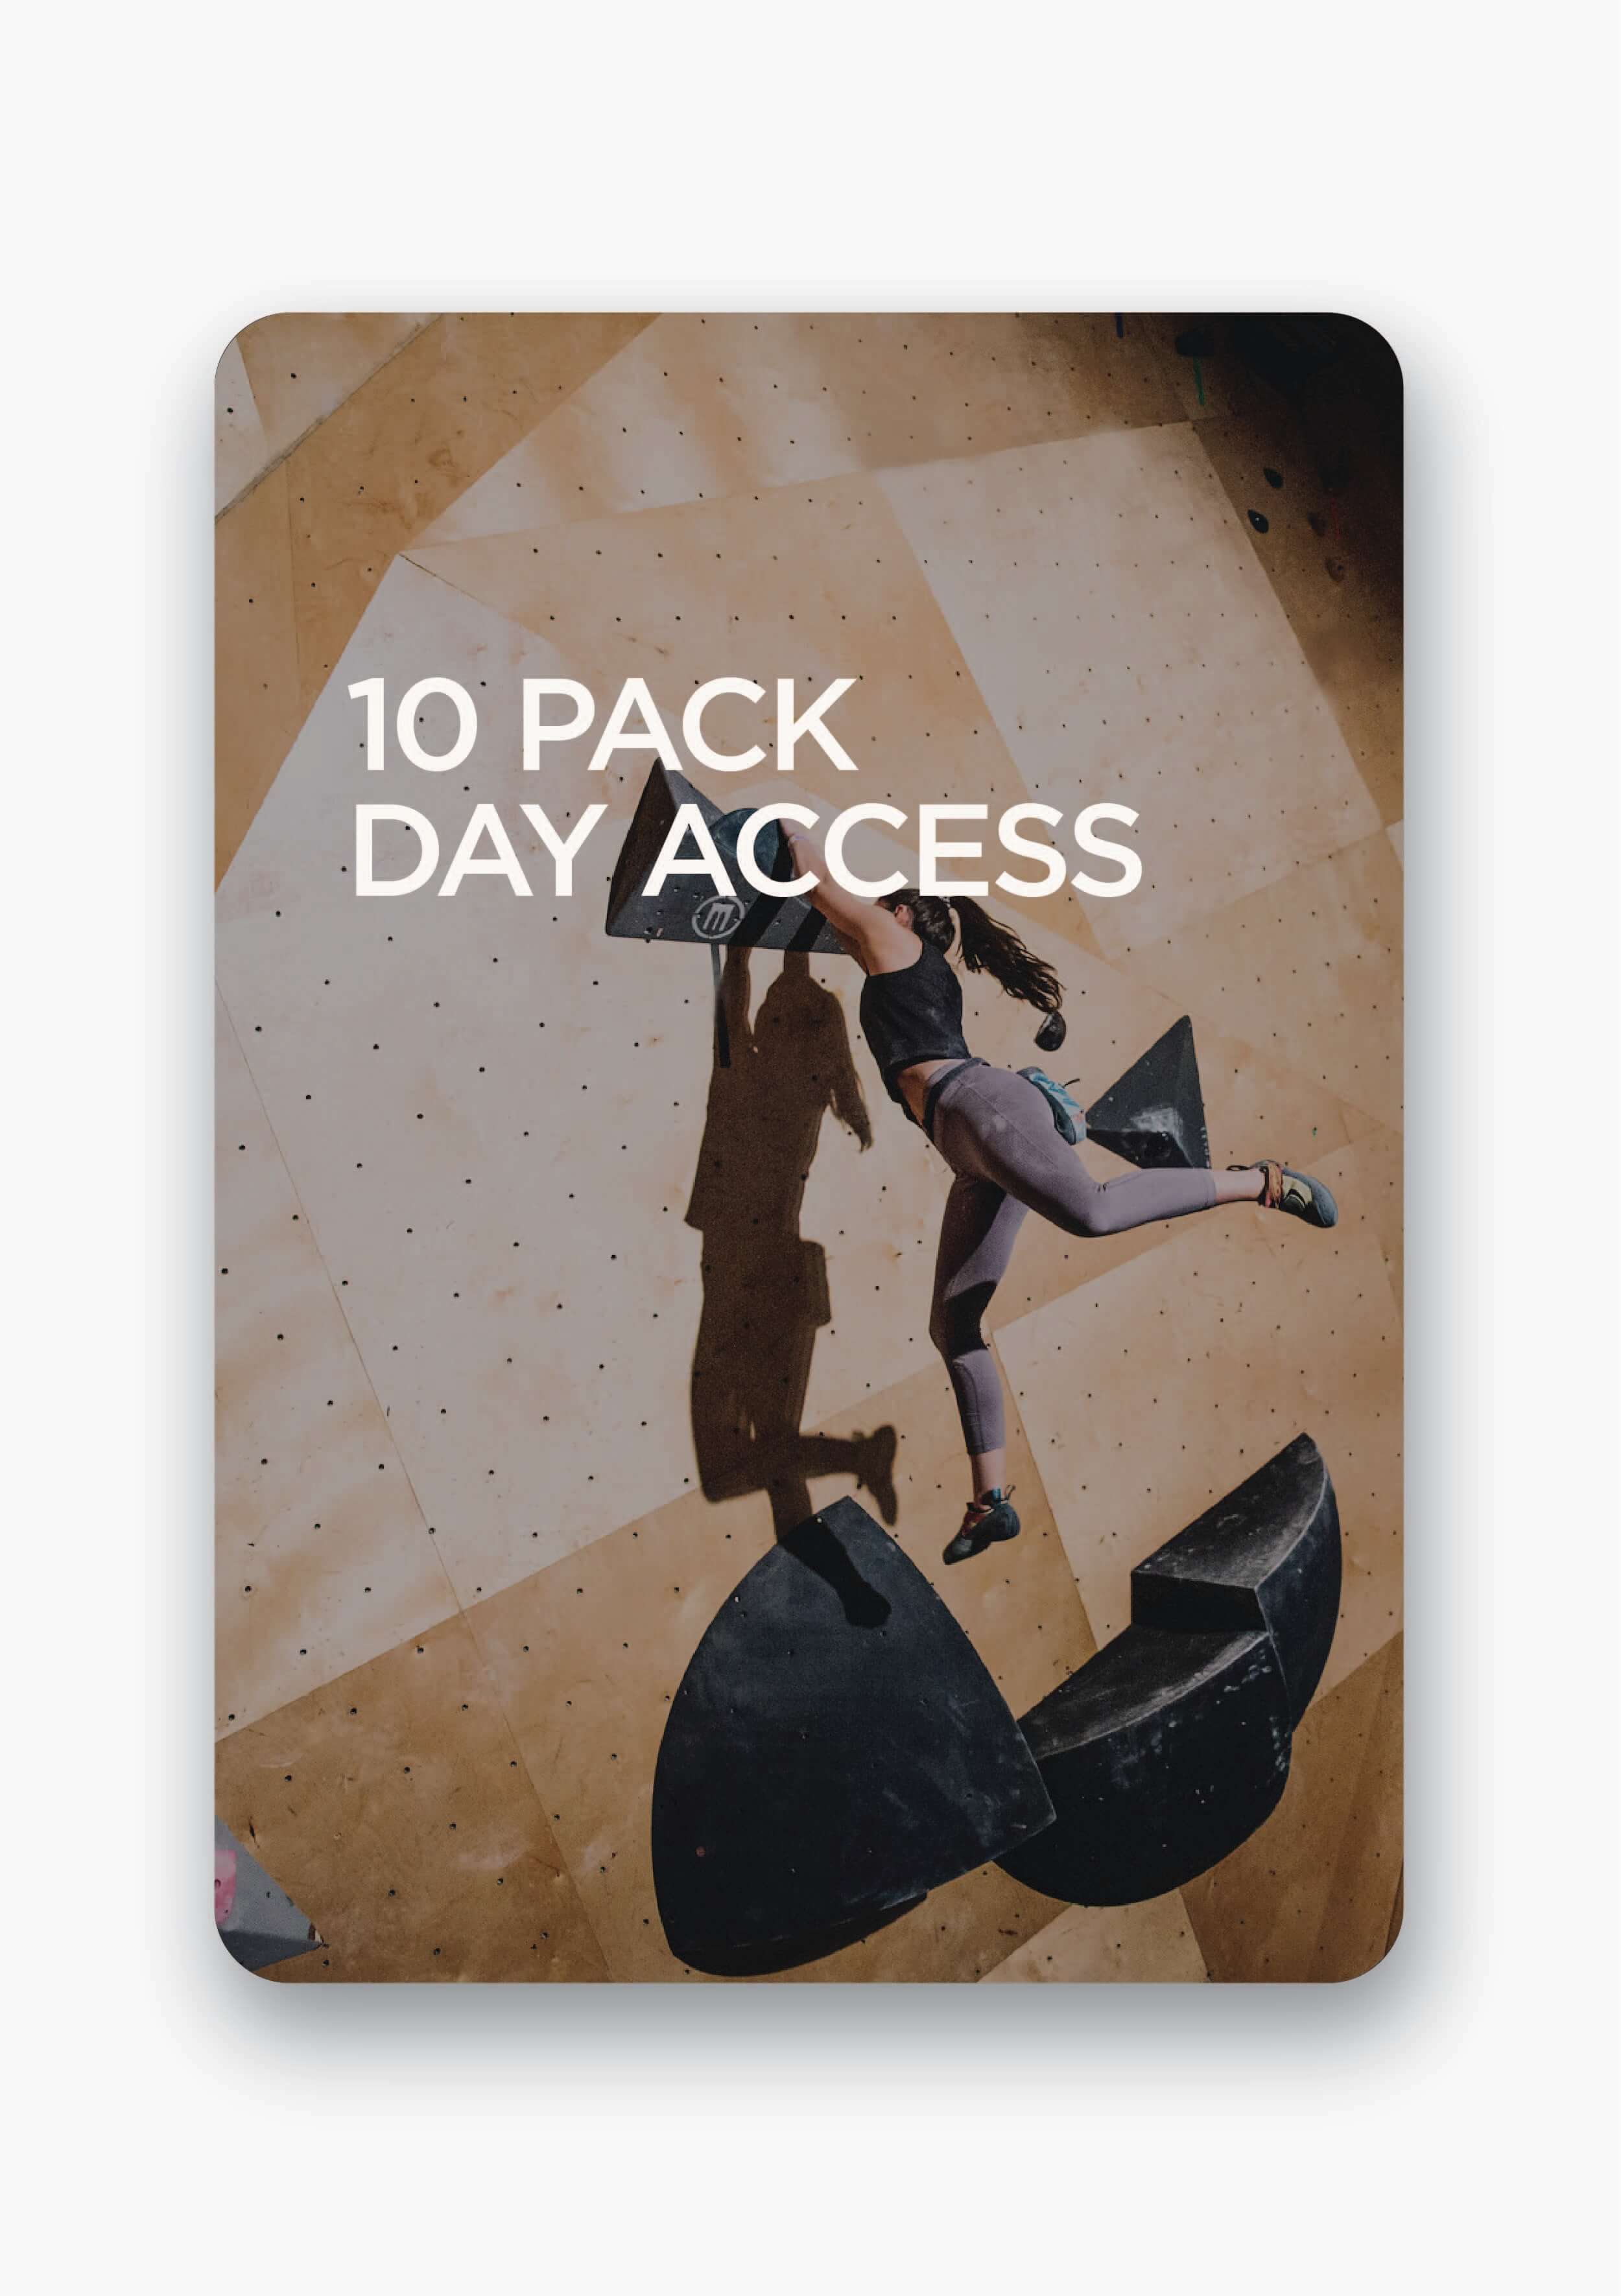 10 PACK DAY ACCESS